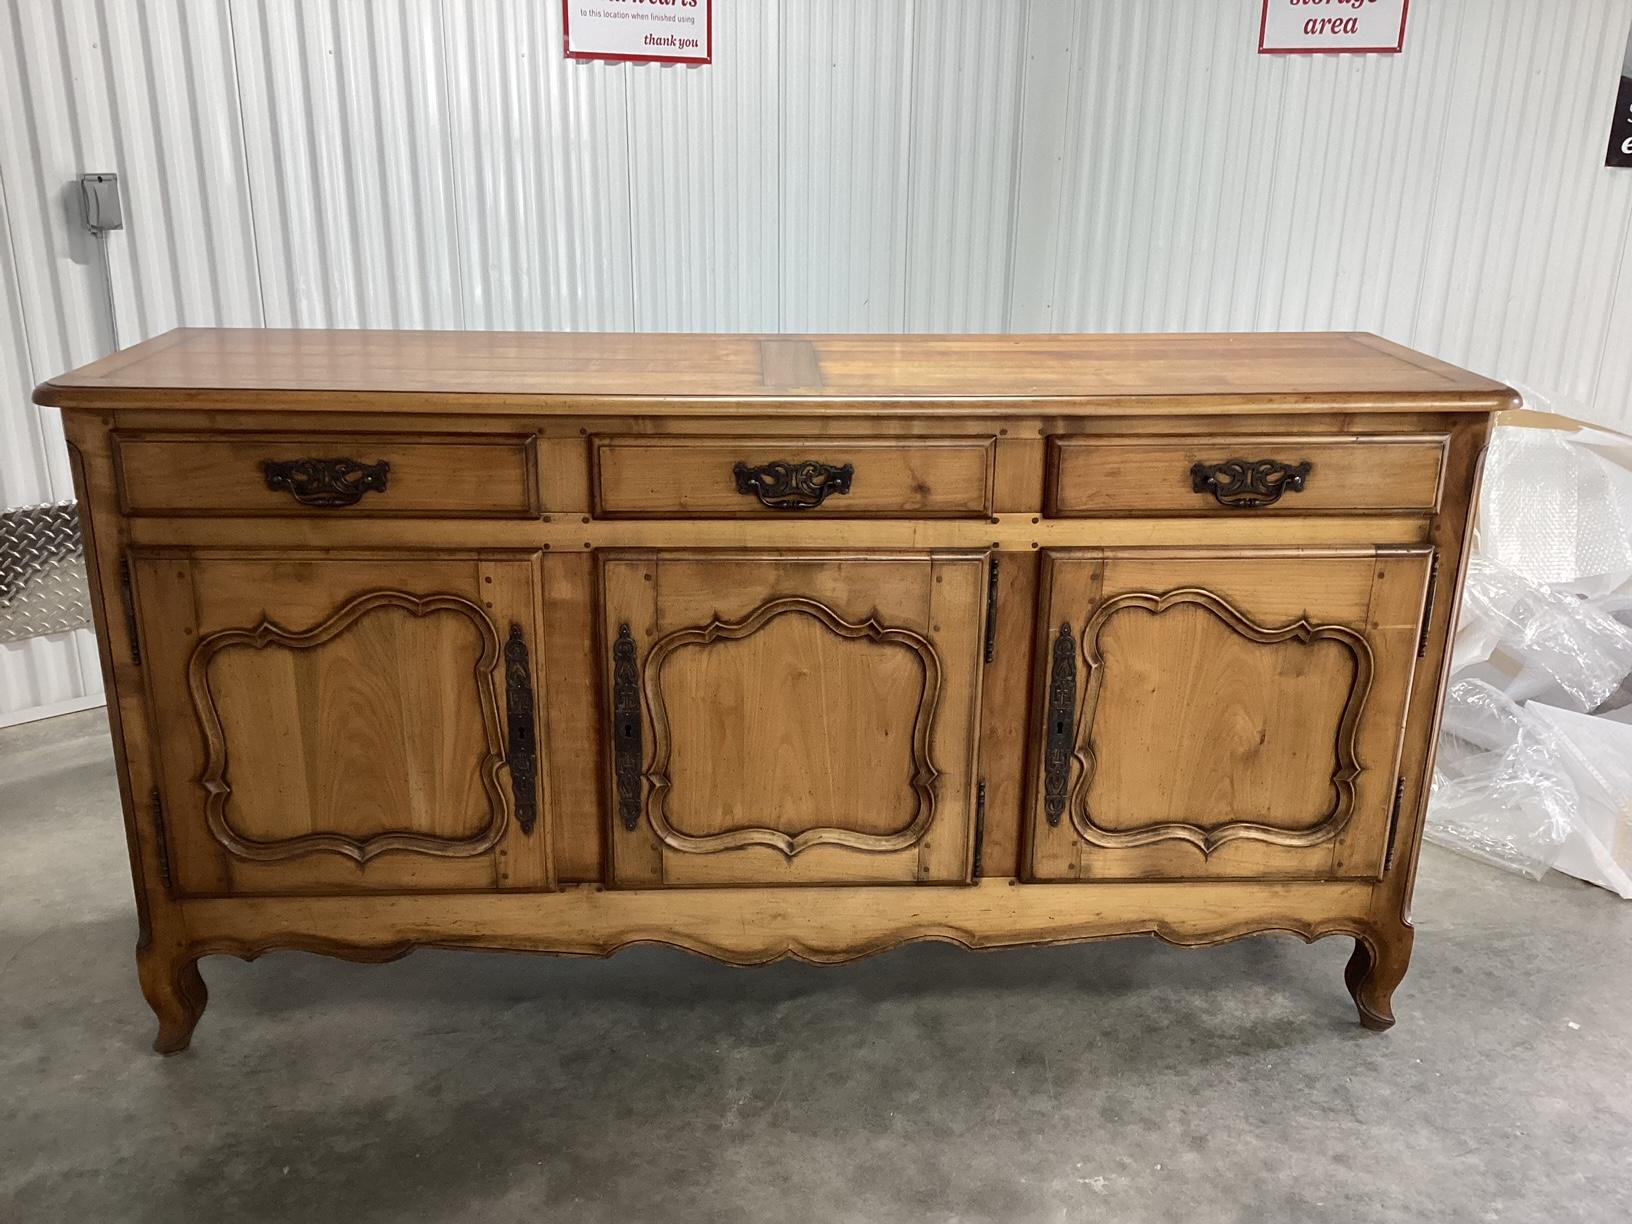 Solid cherry French sideboard having 3 paneled doors and 3 drawers above. The top is made of warm solid cherry wood planks . Drawers are dove tailed and wood dowels are visible. The iron hardware on the drawer pulls and doors is original and very